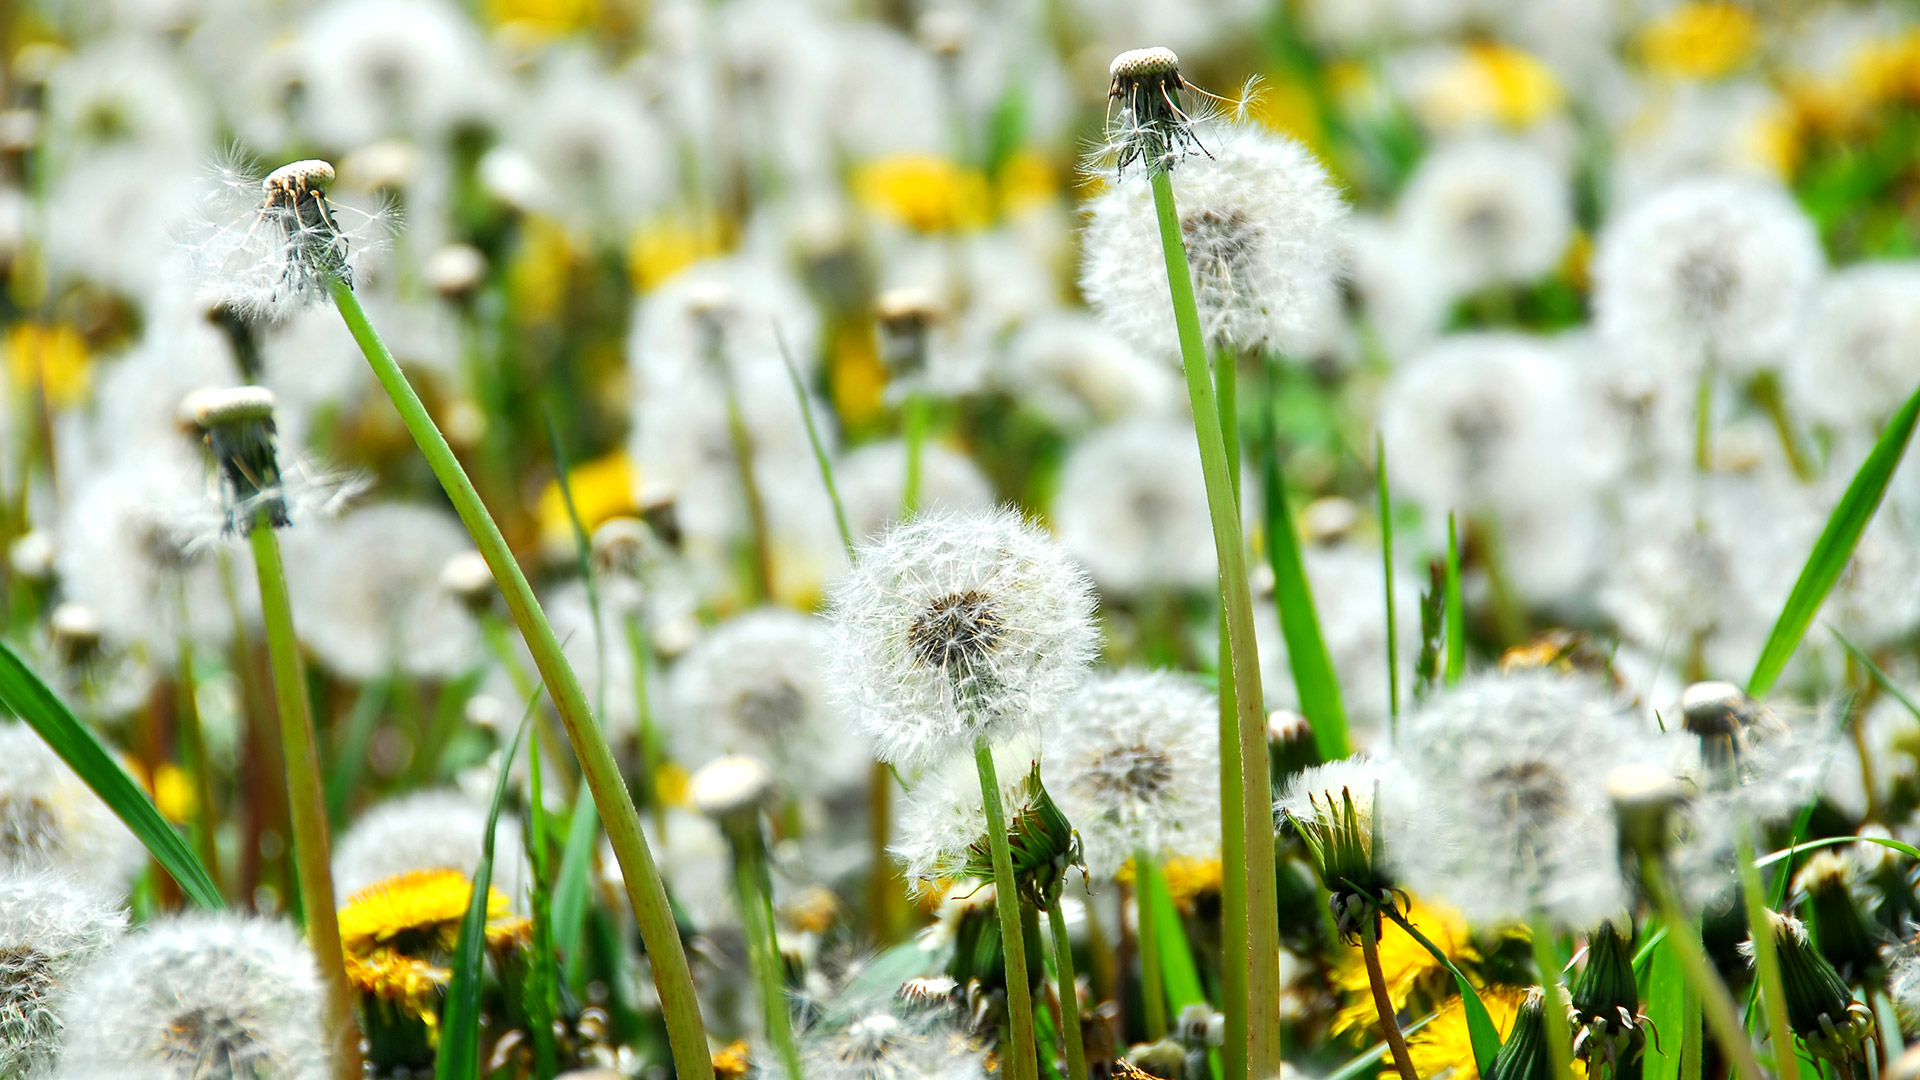 Are Dandelions Taking Over Your Lawn? Here’s How to Show Them Who’s Boss